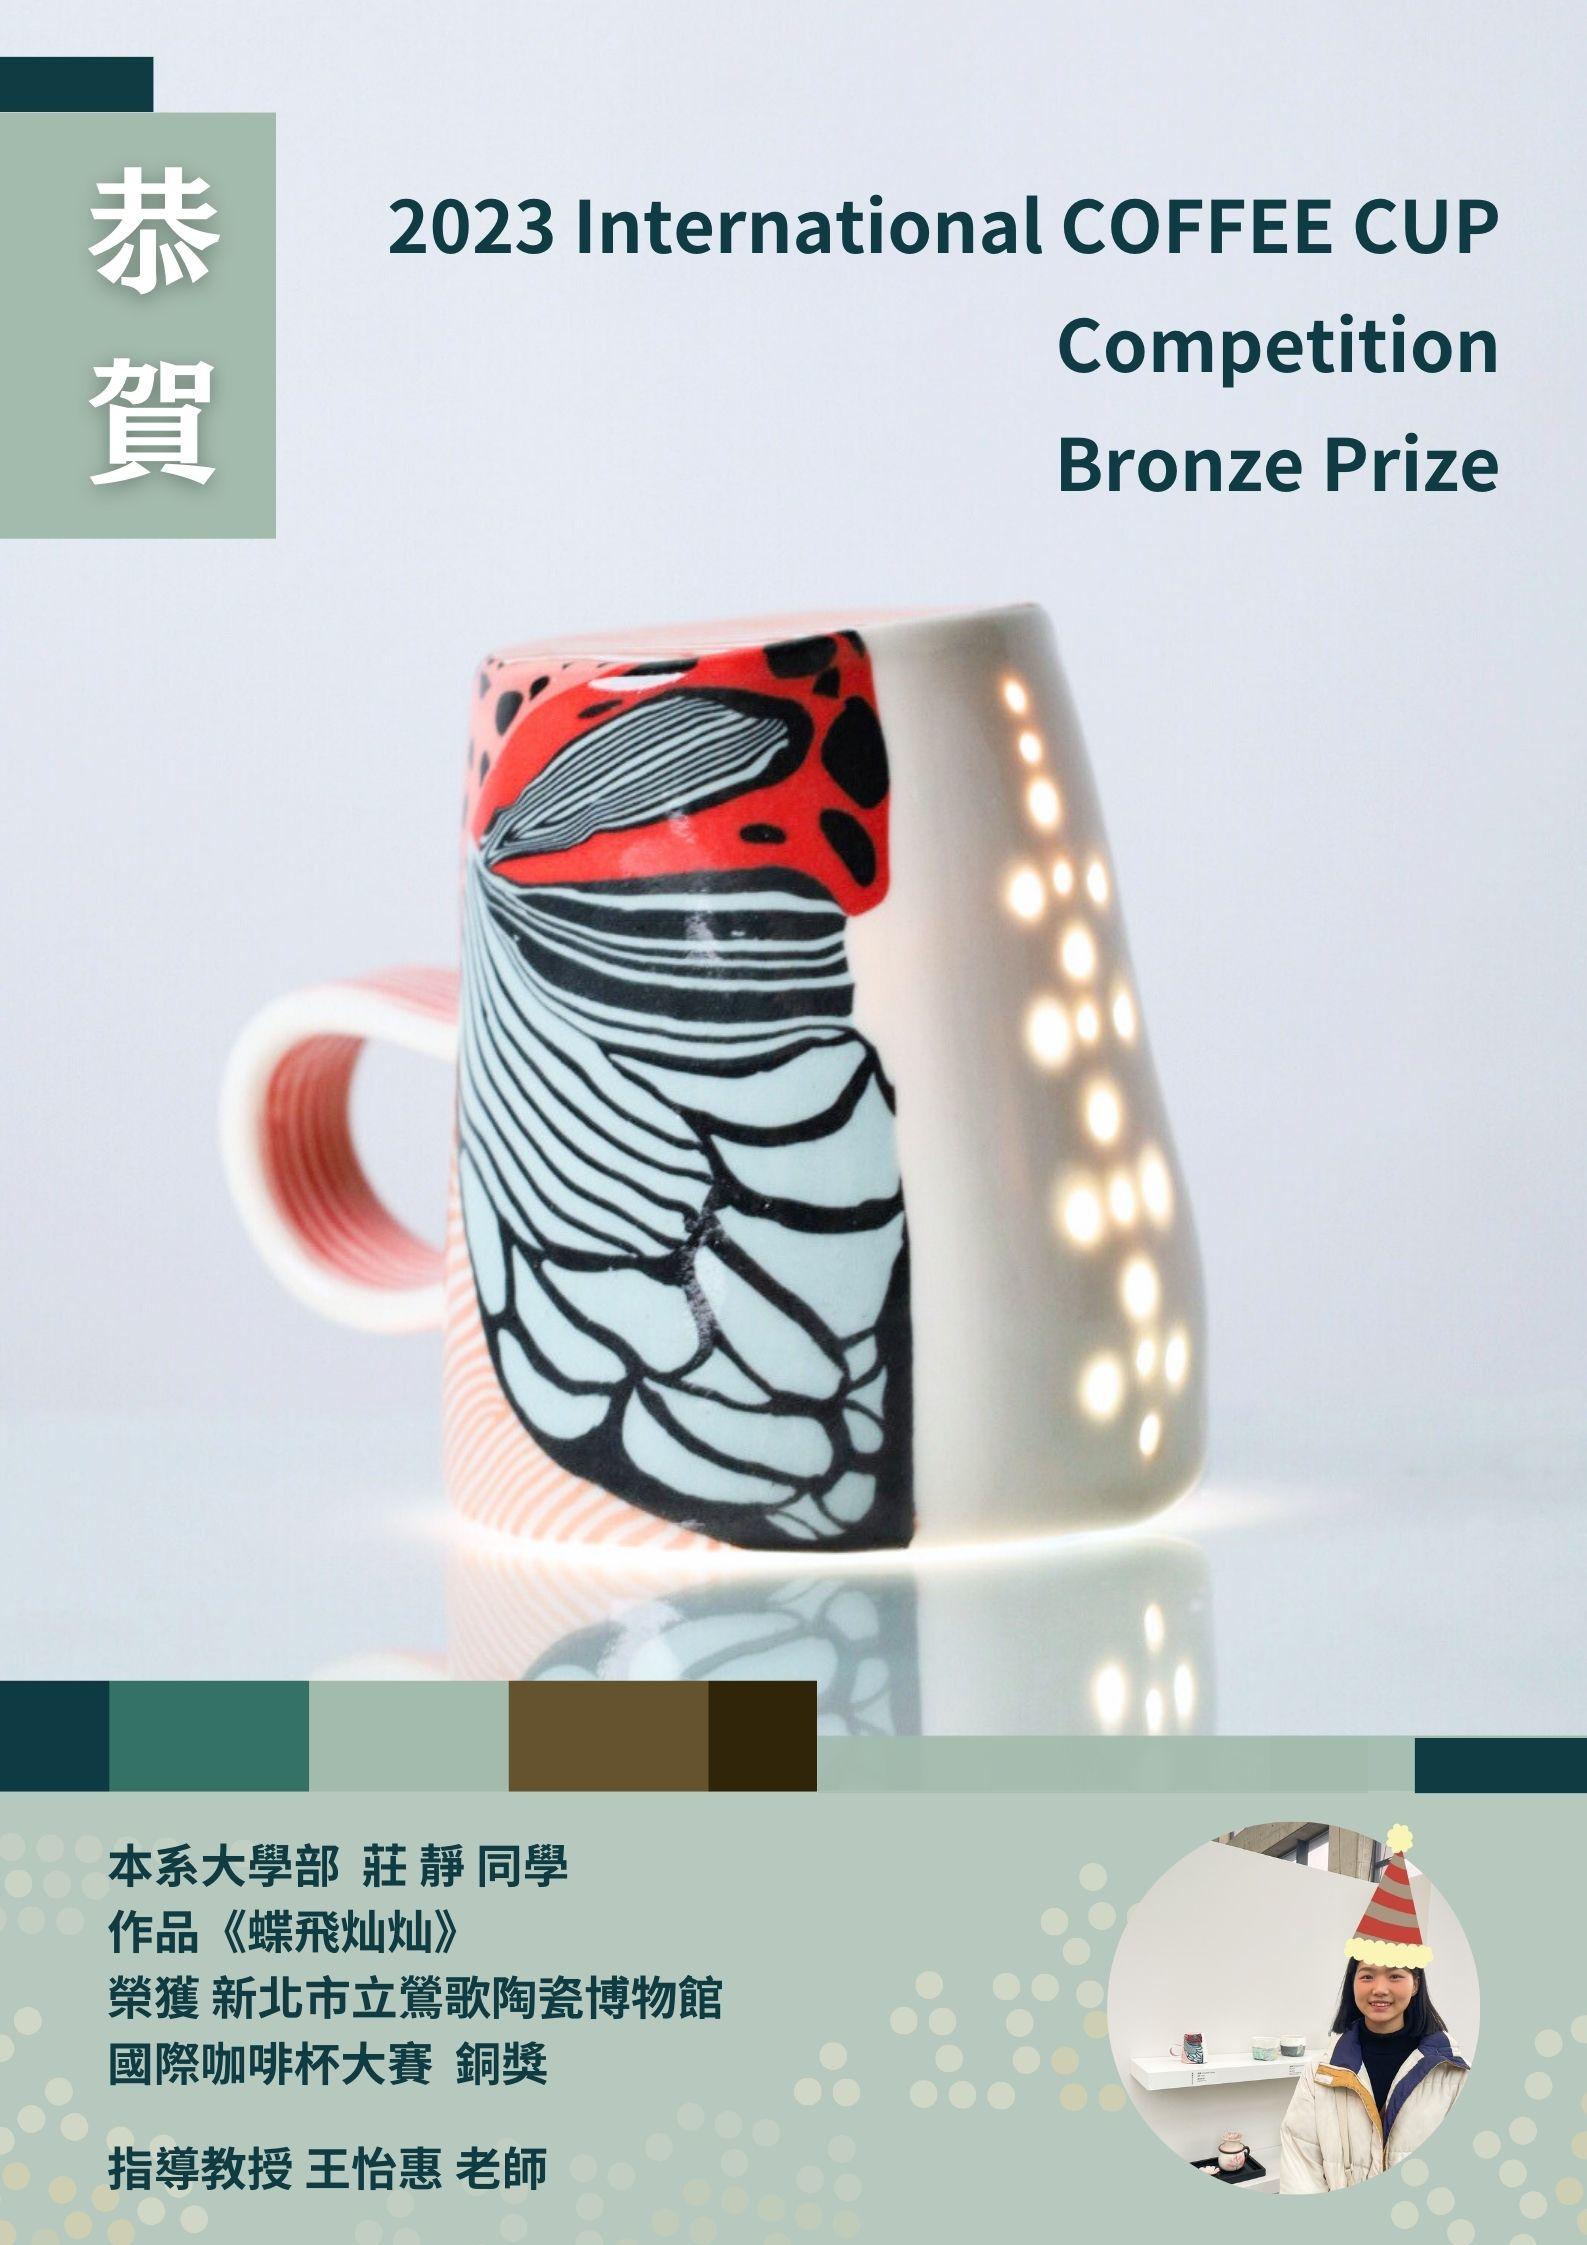 Congrats! CVD student Miss Zhuang won 2023 International COFFEE CUP Competition Bronze Award